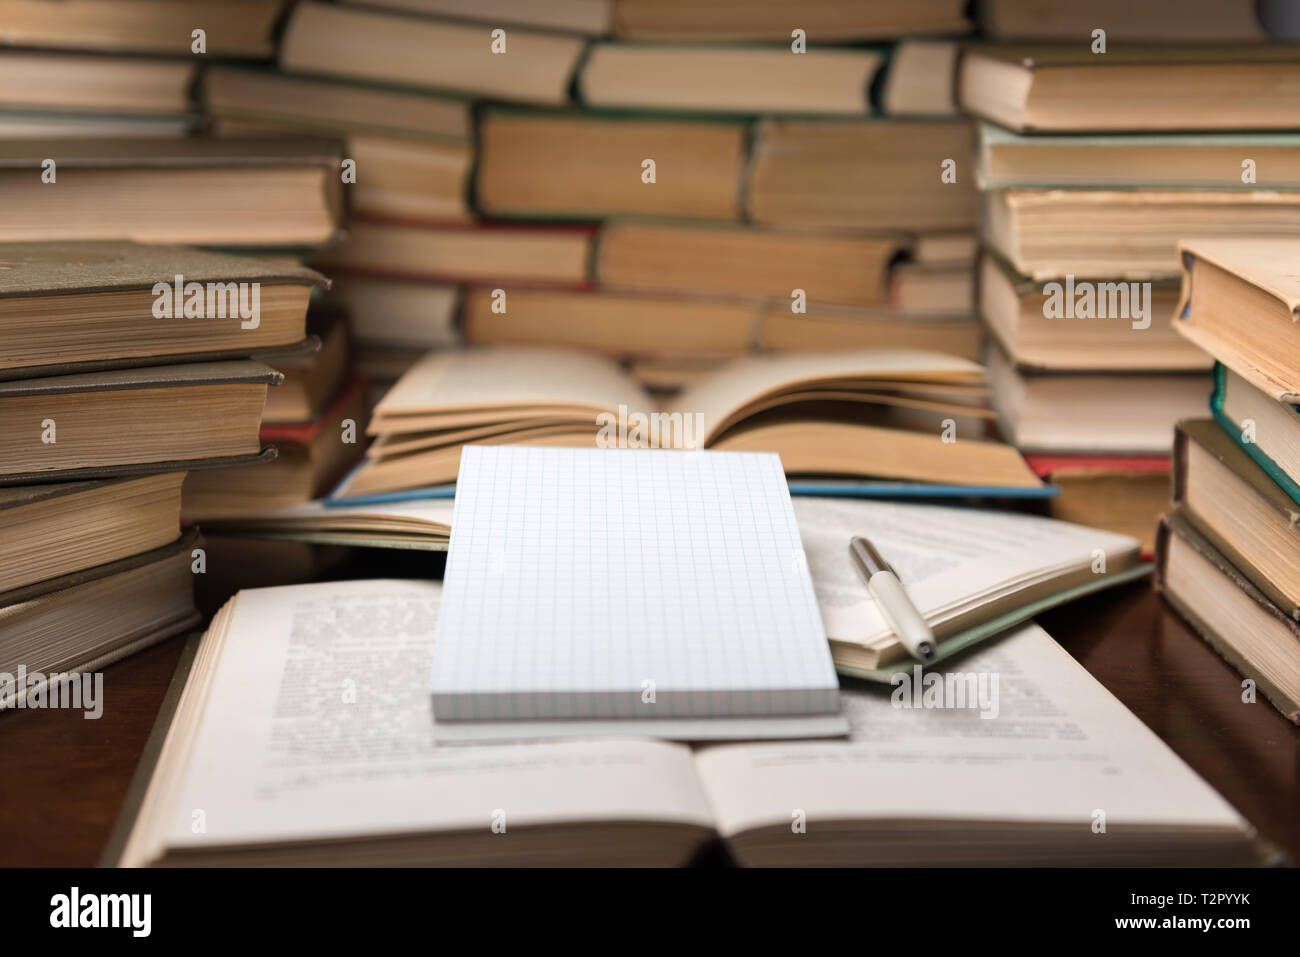 https://c8.alamy.com/comp/T2PYYK/education-learning-concept-with-open-book-and-notebook-on-the-table-stack-piles-of-books-on-reading-desk-and-glasses-in-bookshelves-background-T2PYYK.jpg